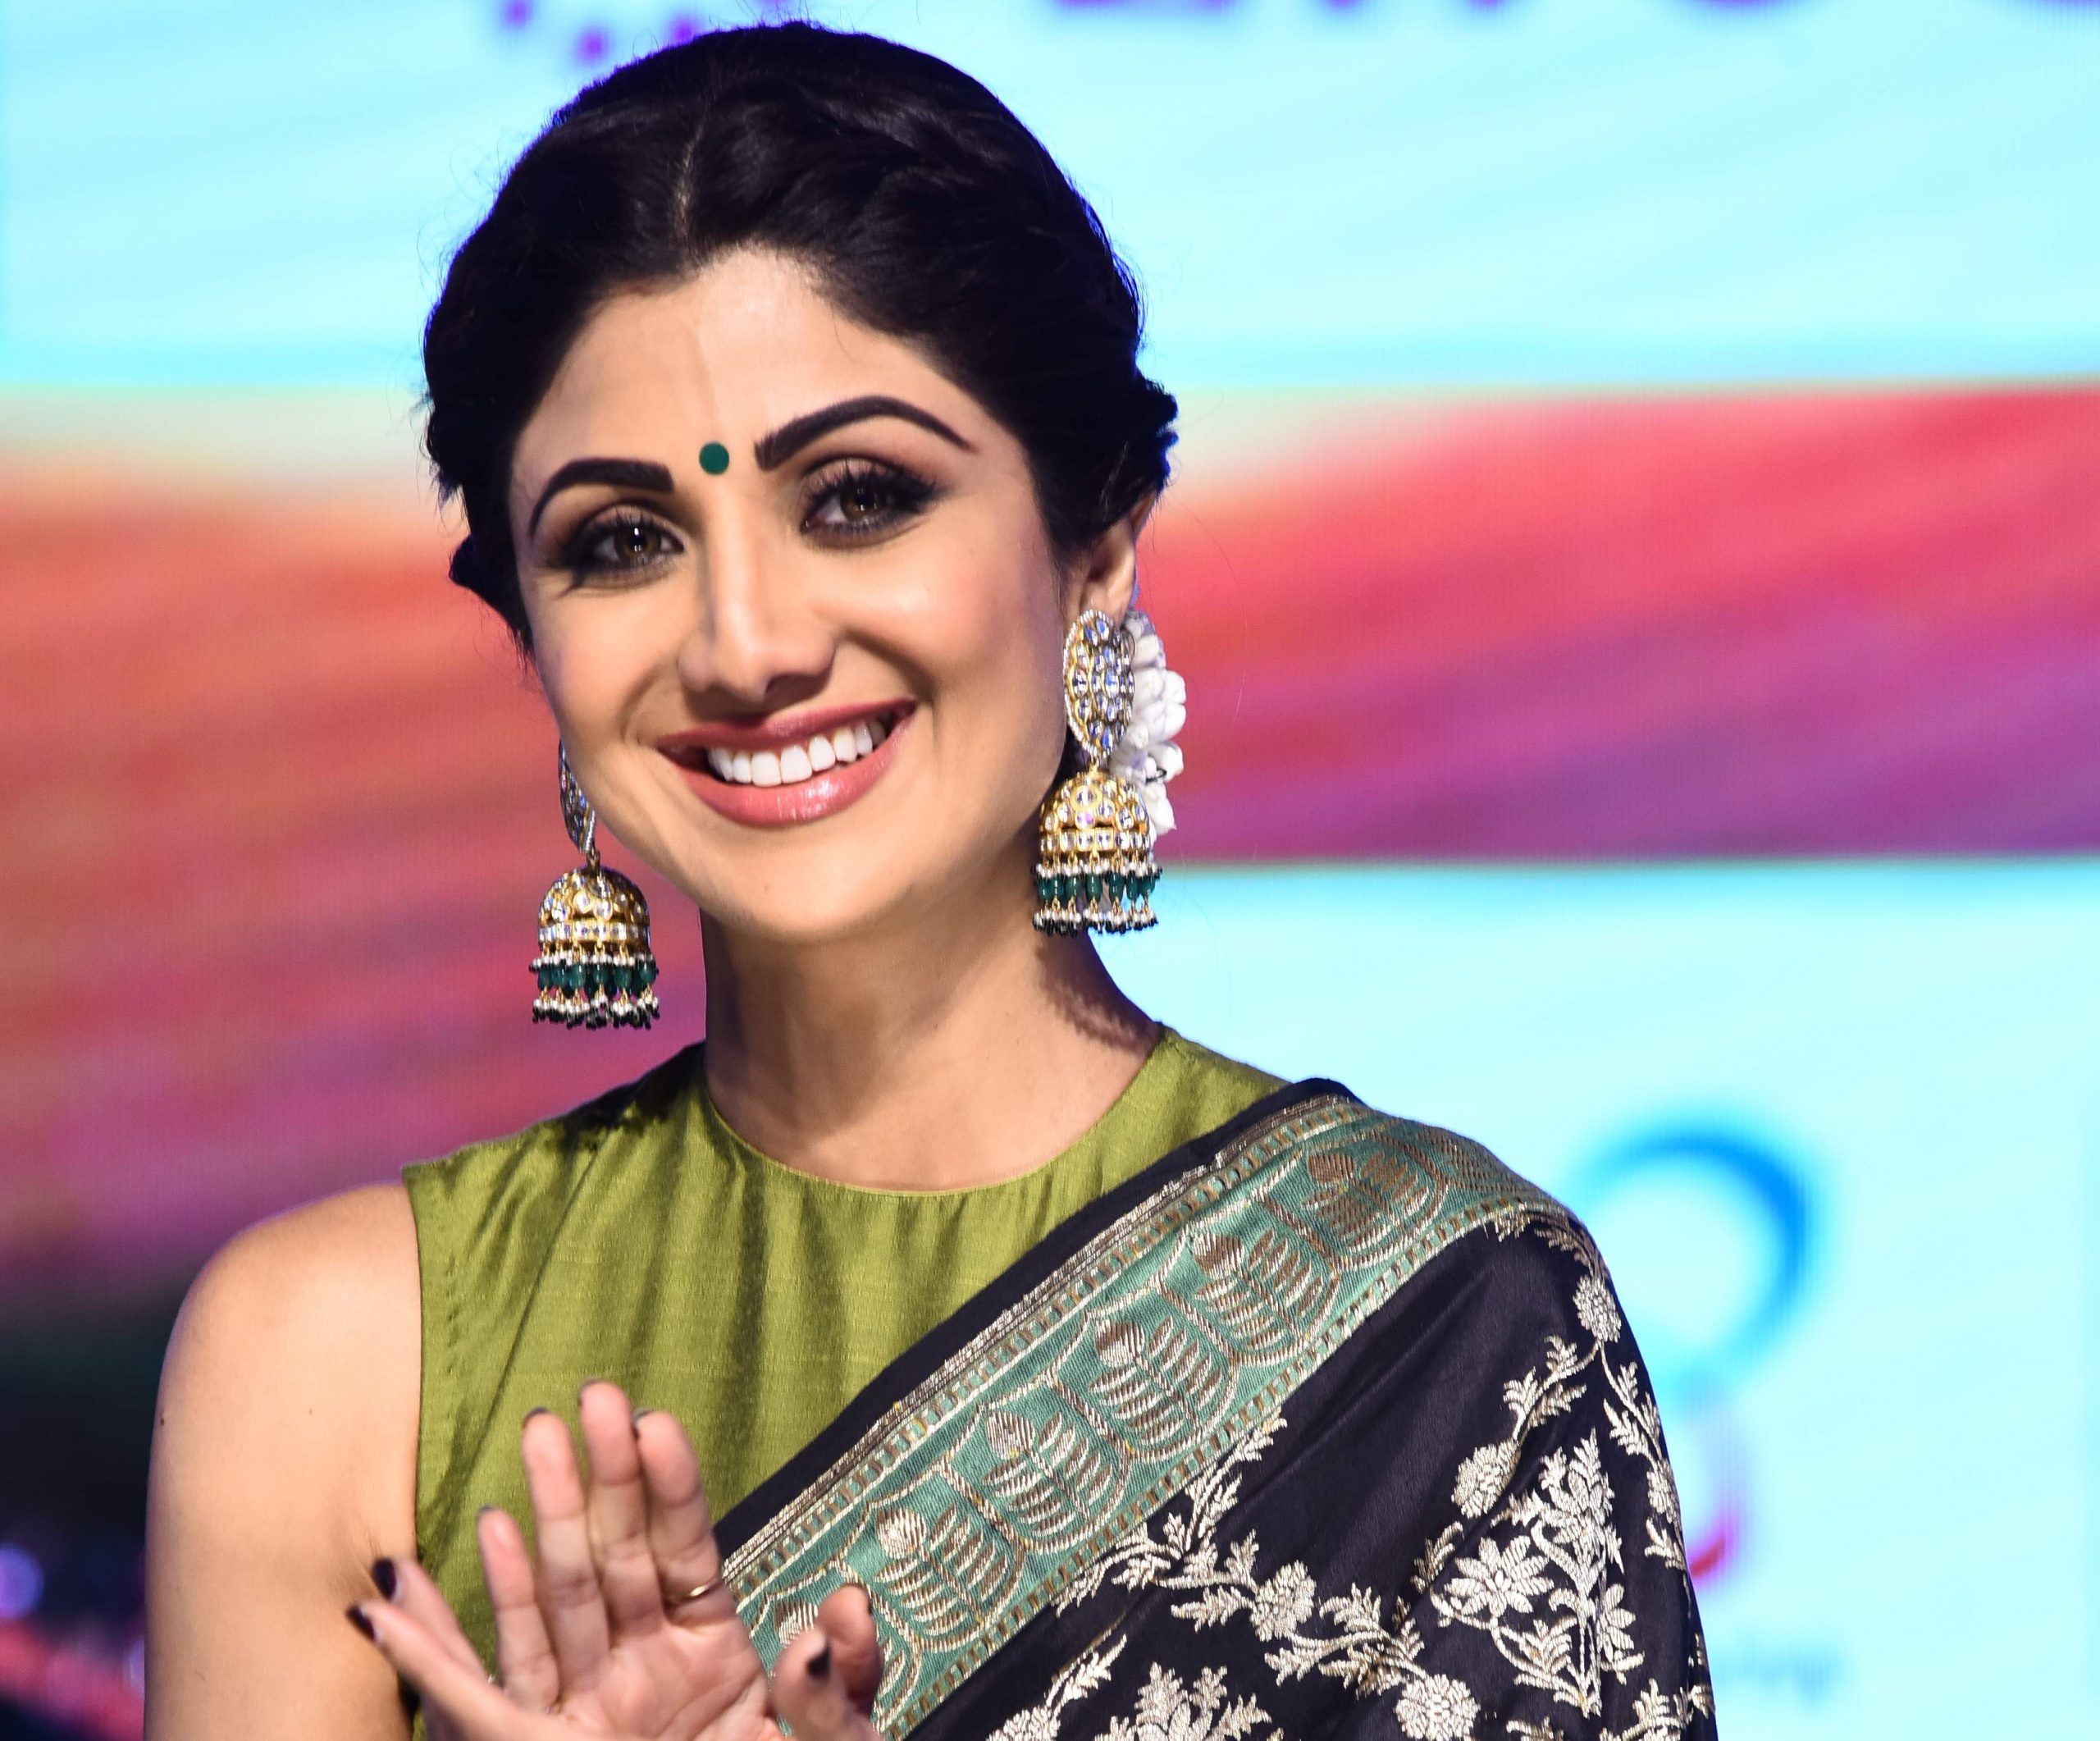 Shilpa Shetty On The Way In Car Xxx Video - Shilpa Shetty: 'Producers Threw Me Out of Their Films Without Any Reason' -  Masala